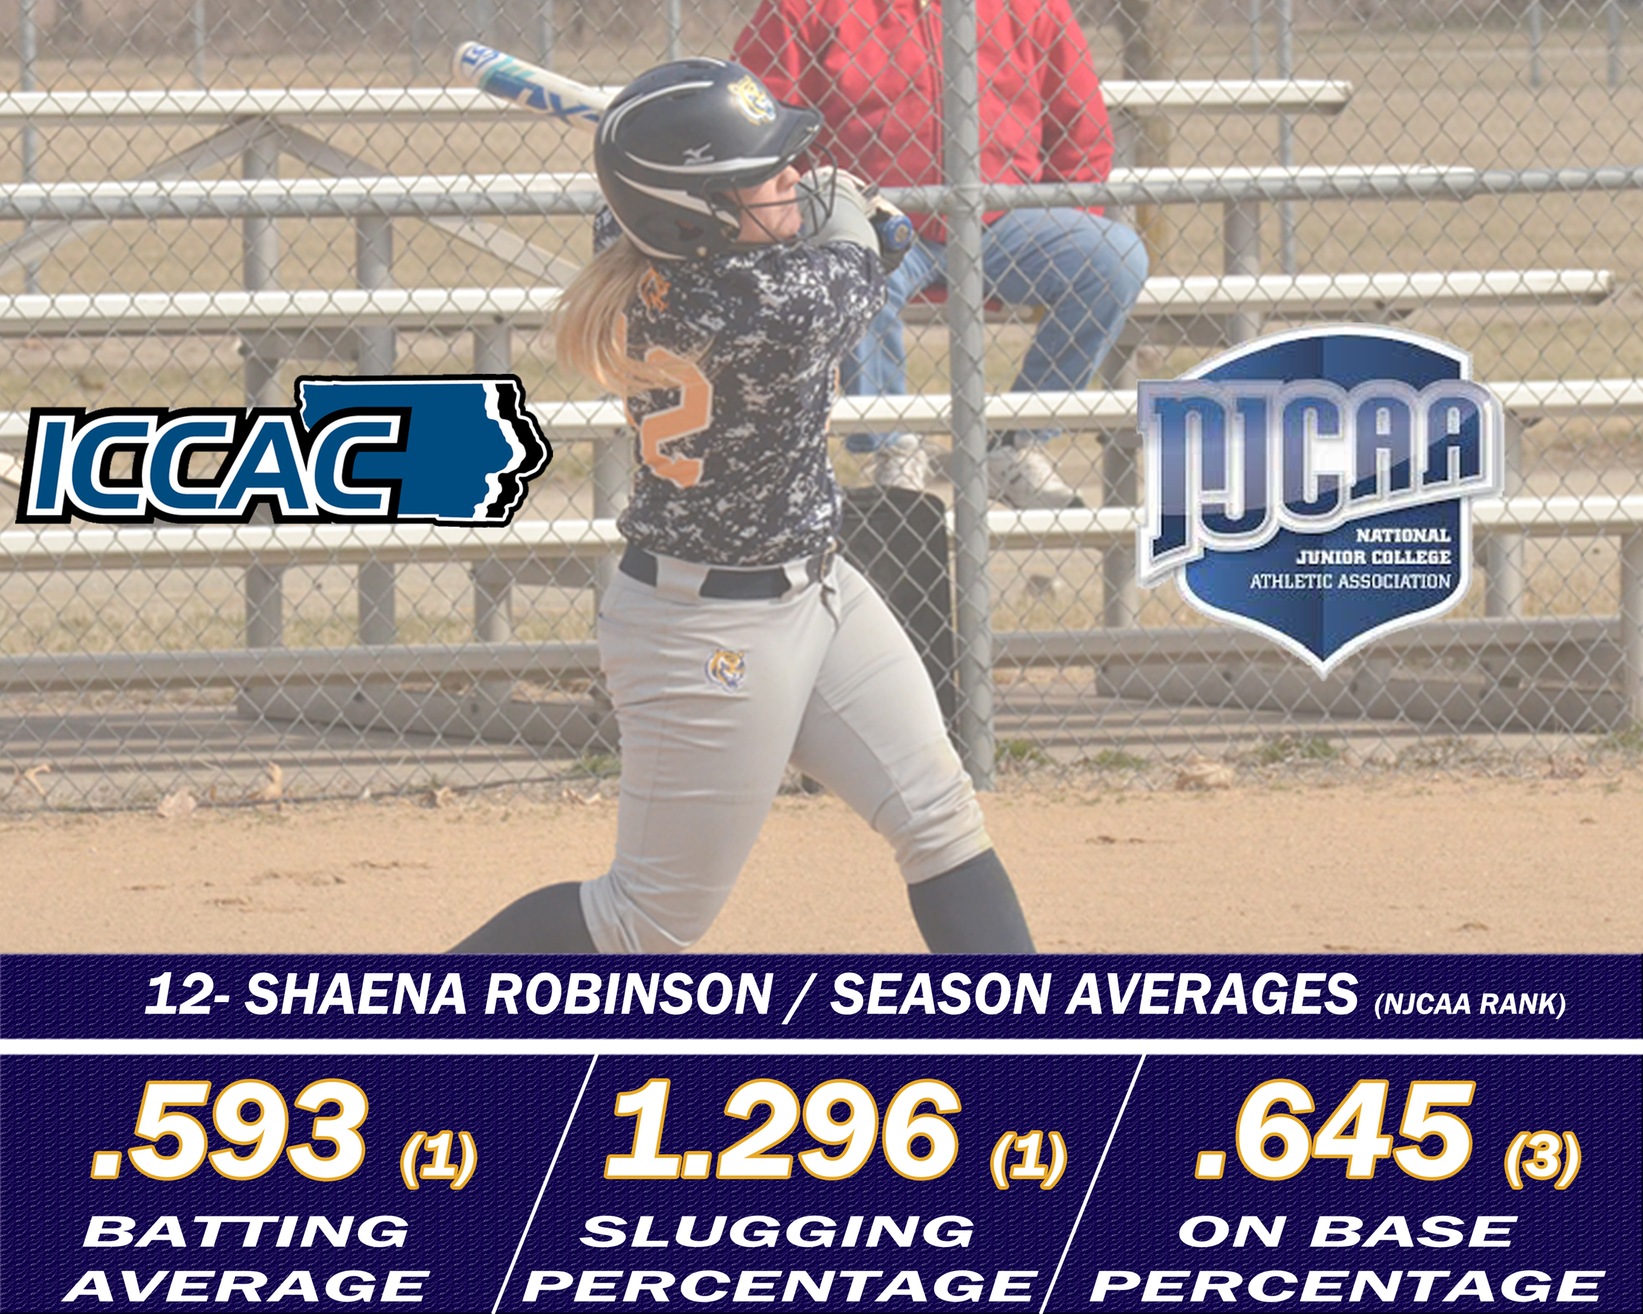 Shaena Robinson has been named the ICCAC Player of the Week for the second time this season